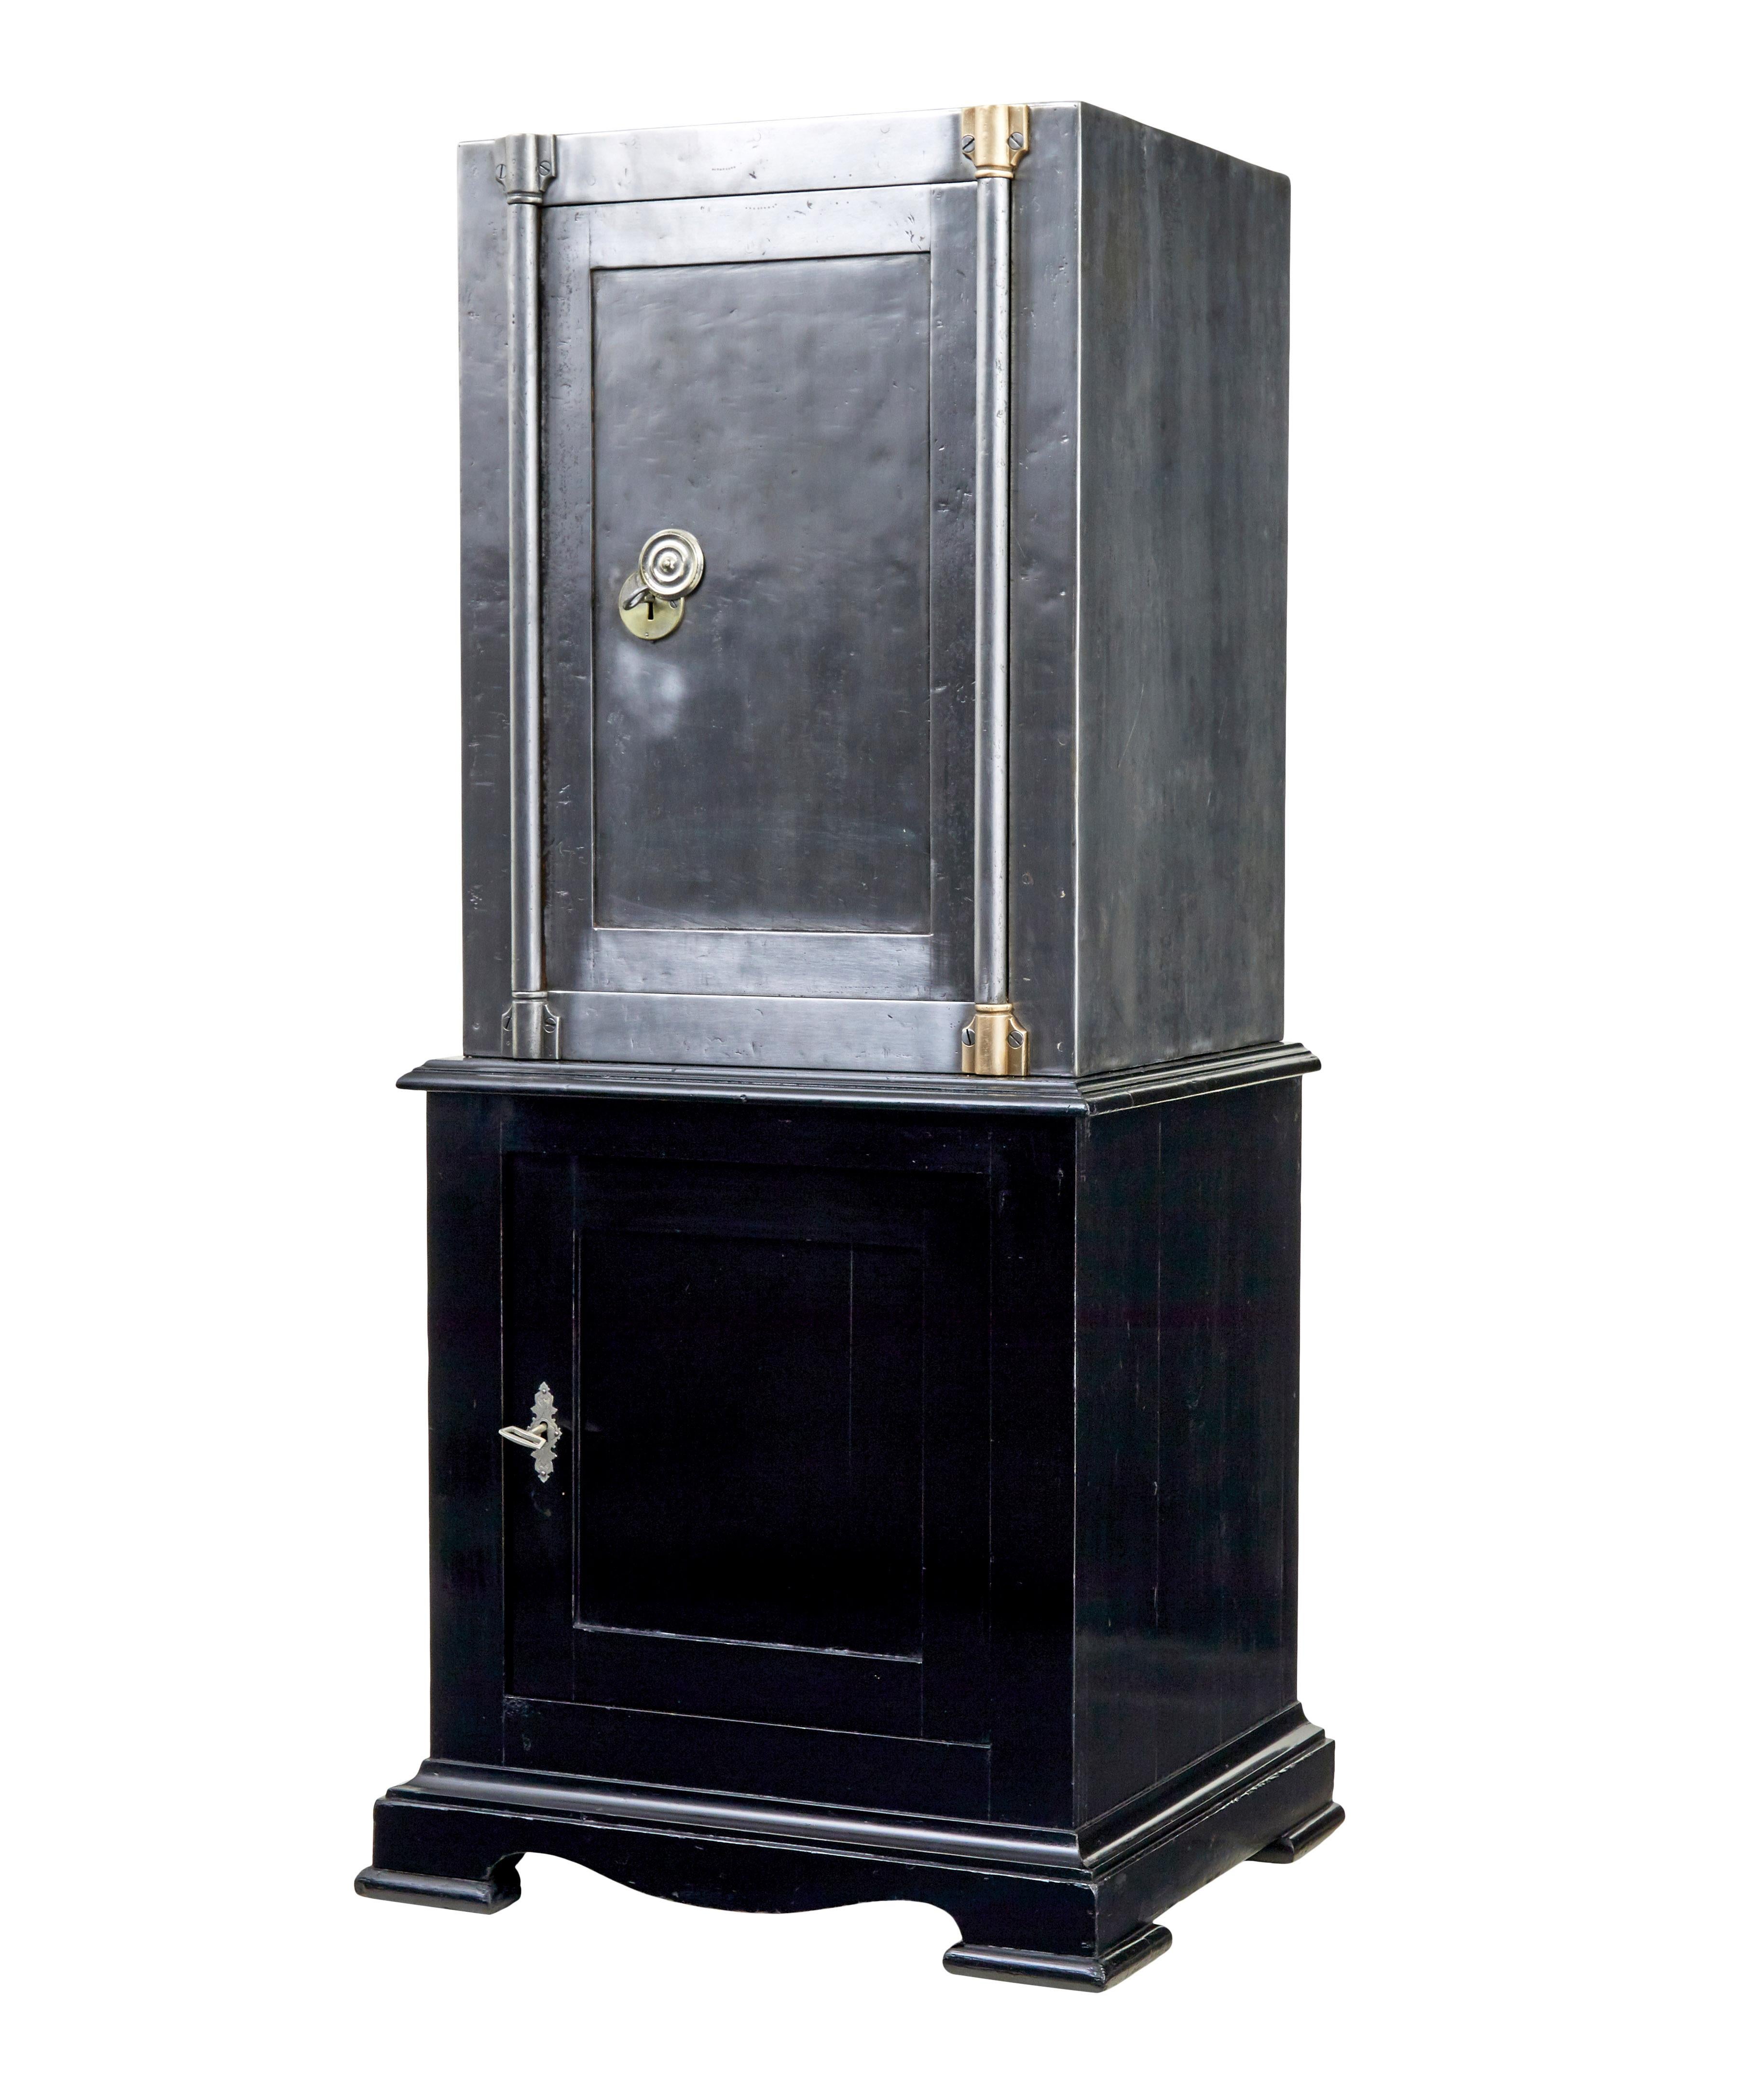 19th century Danish polished steel safe on stand circa 1890.

Fine quality Danish solid steel safe on lacquered pine base cabinet.  Metalwork has been stripped back to reveal the polished steel surface.  Door opens on the key to reveal the original